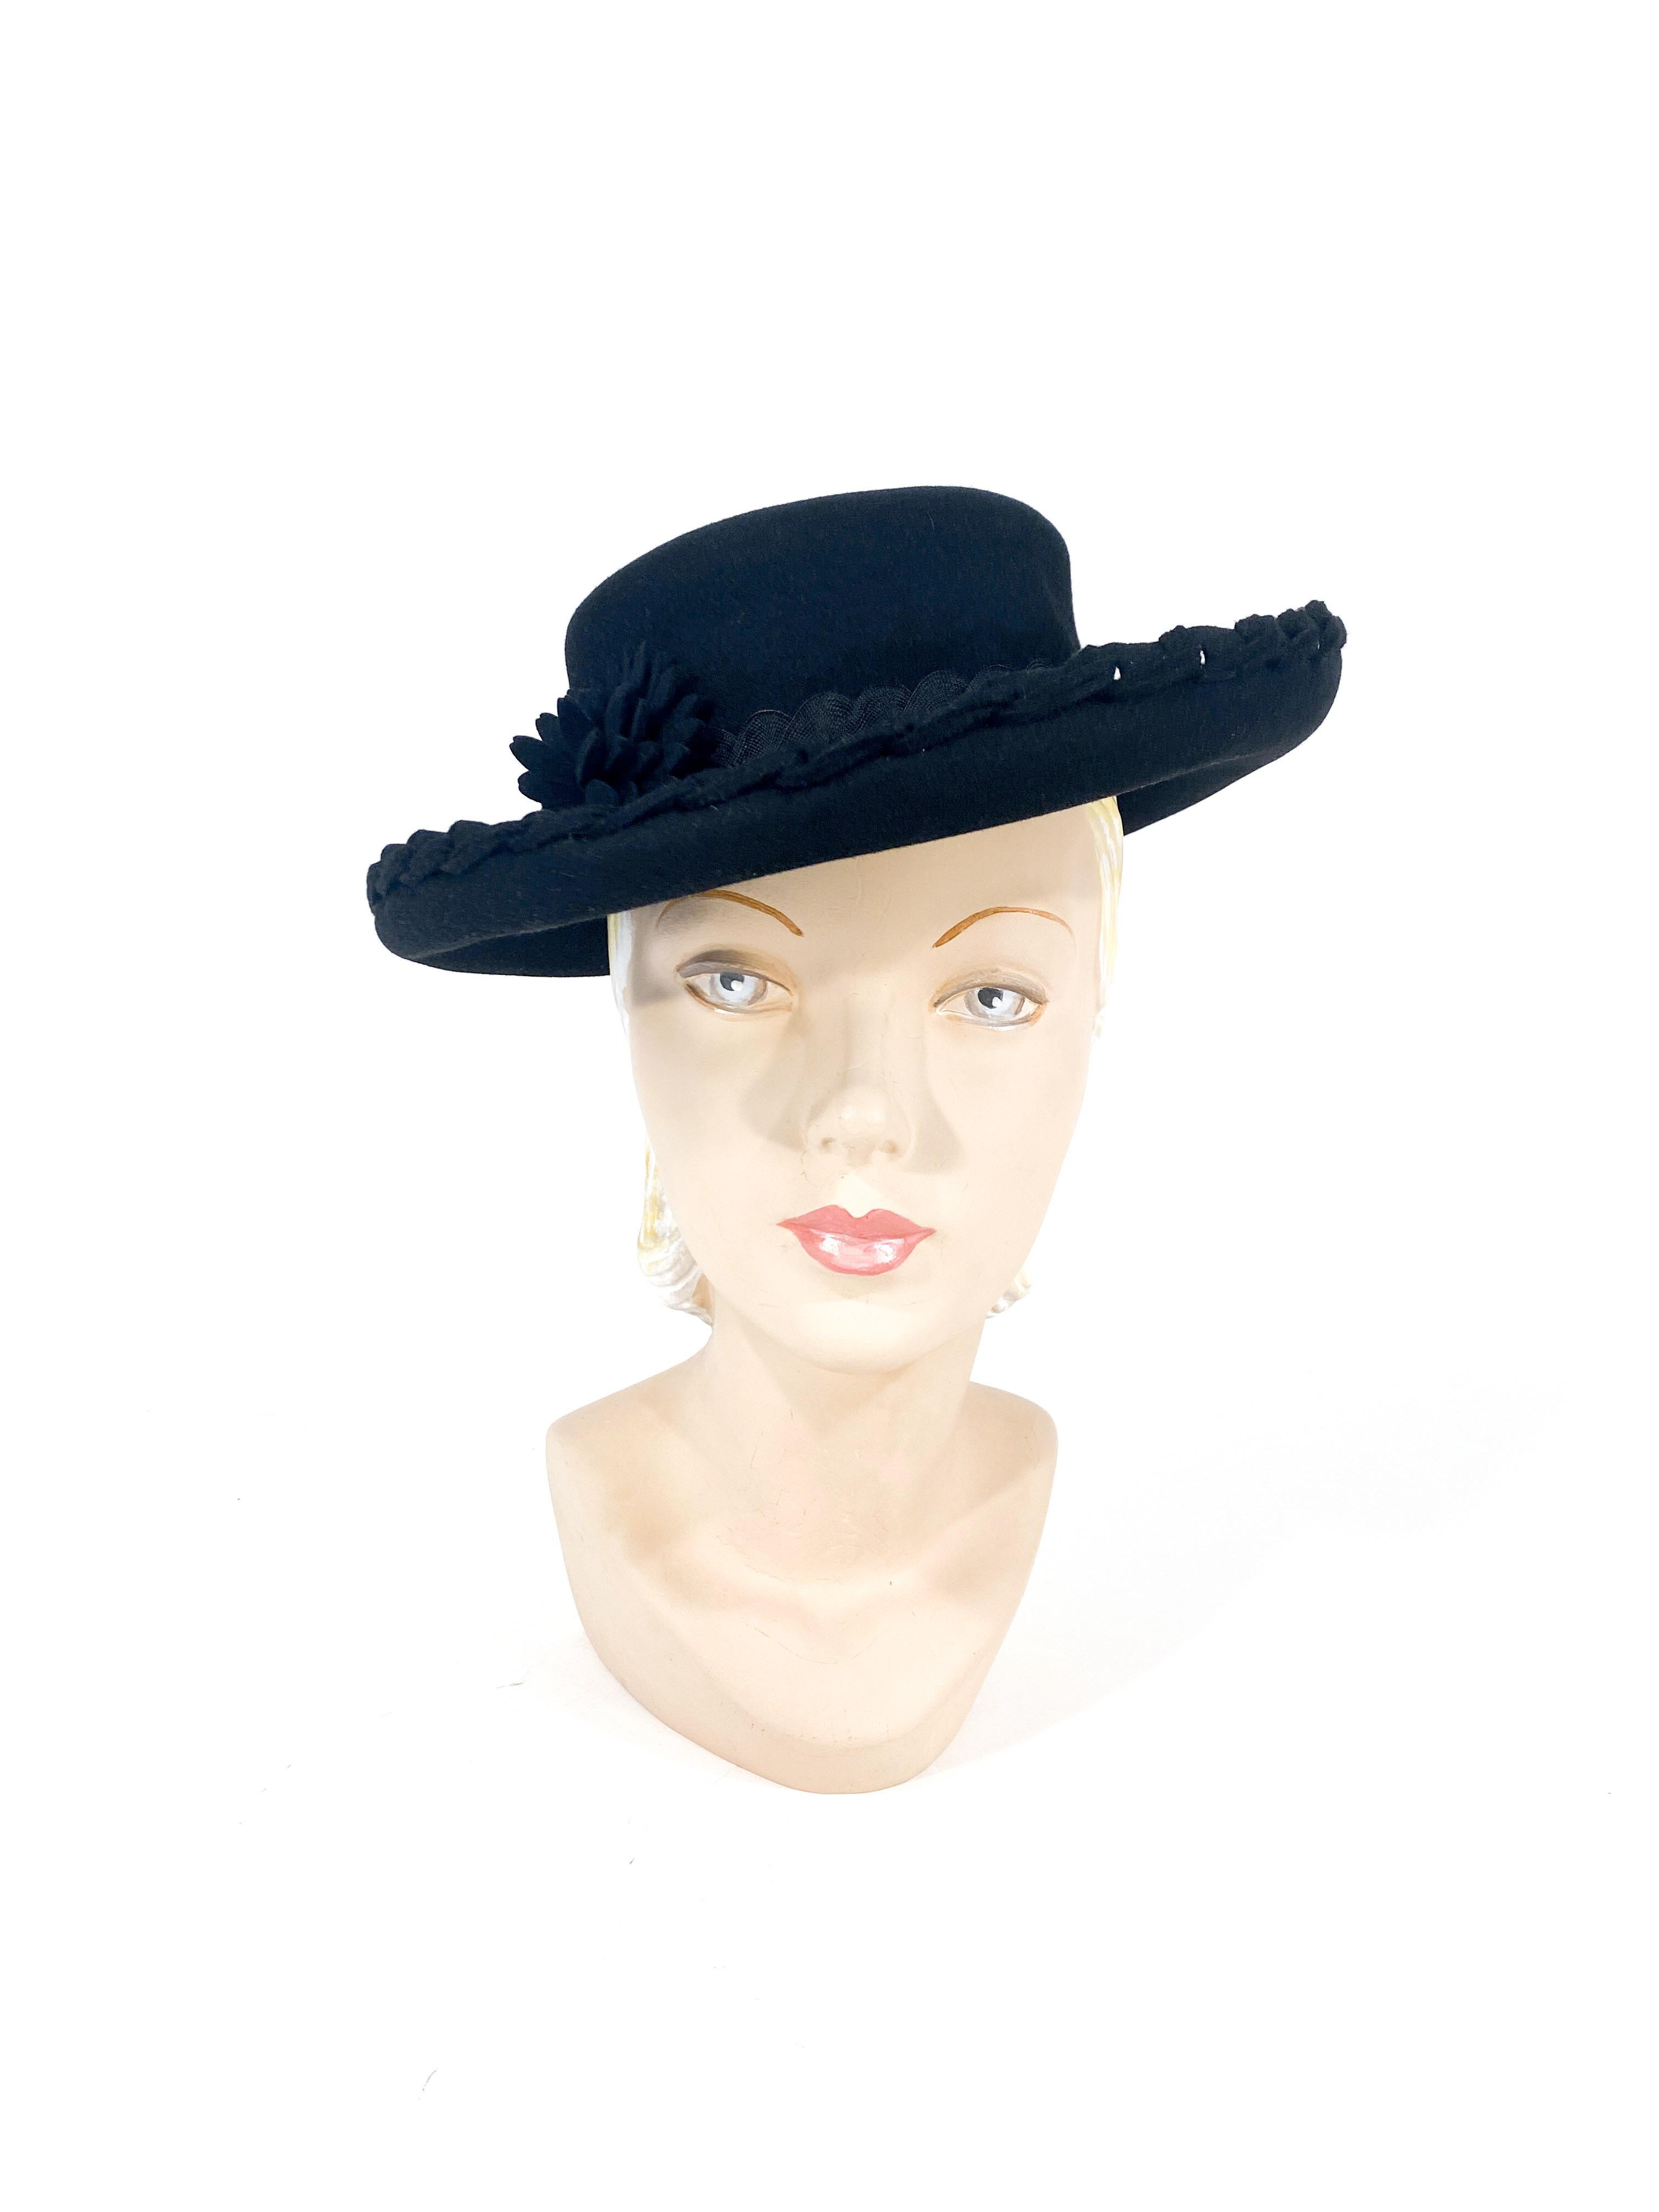 1940s black cashmere felt pork pie hat with rolled brim decorated with hand-braided trim, double bric-brac band, and a hand sculpted flower. The interior has the original price tag.